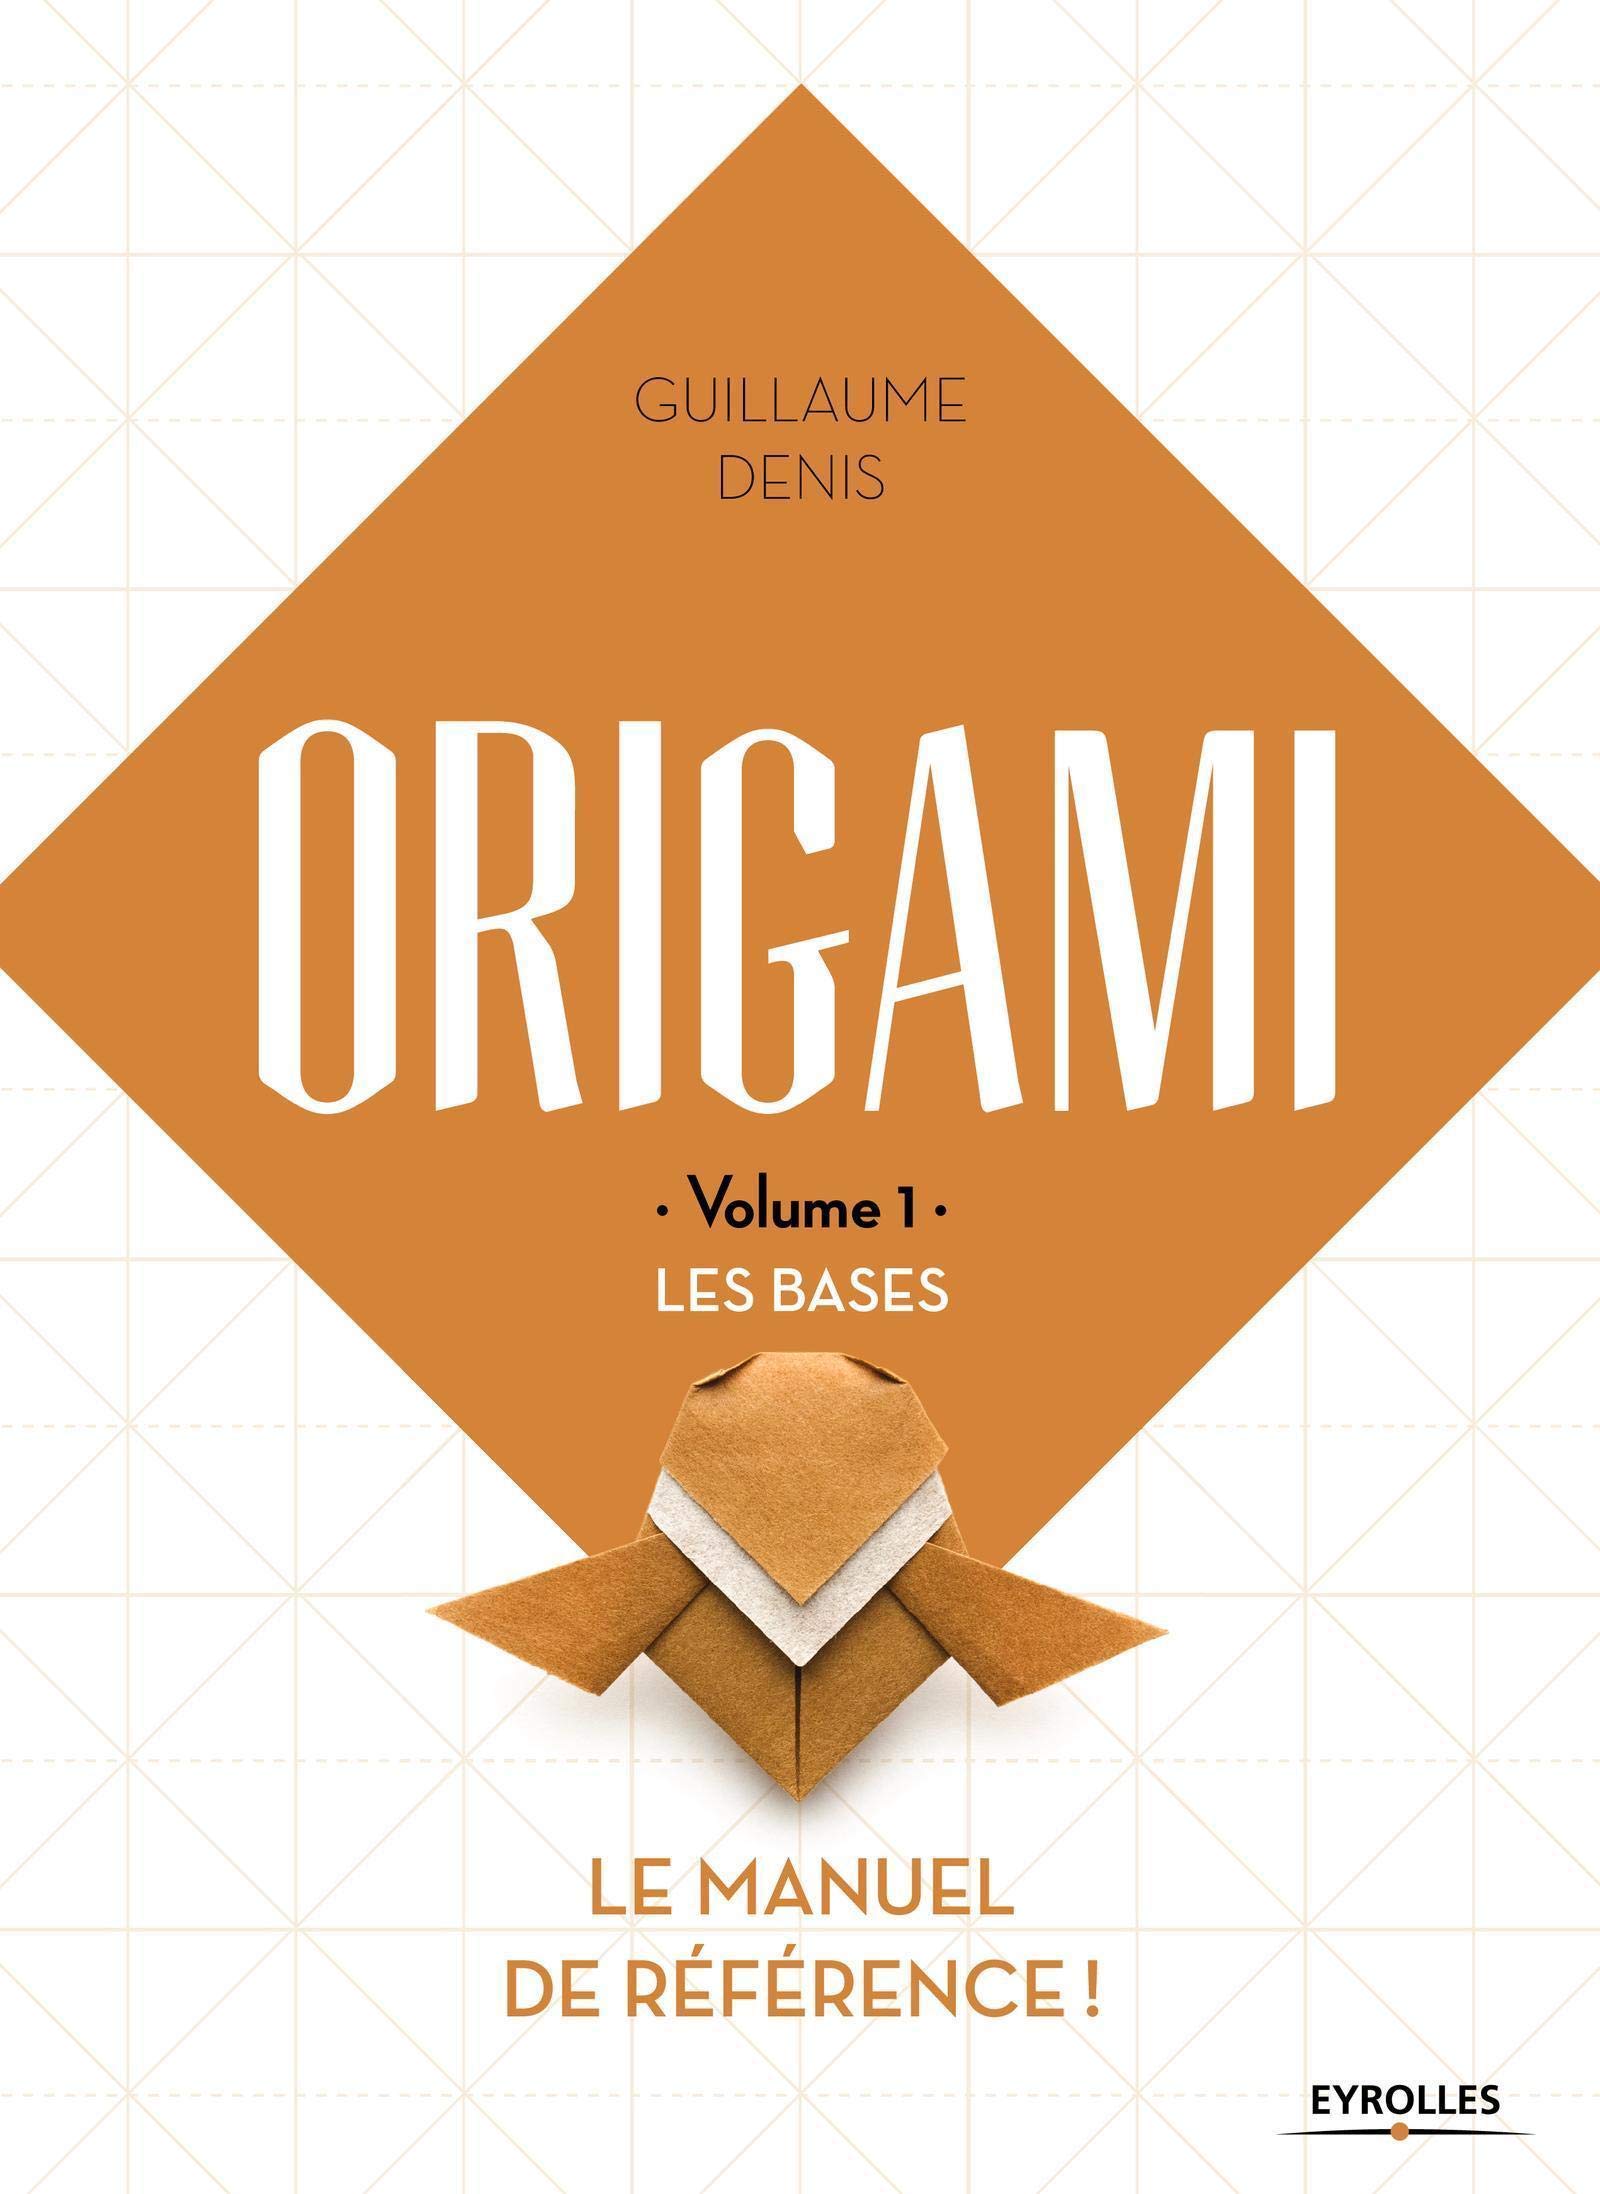 ORIGAMI - Volume 1 - LES BASES : page 138.